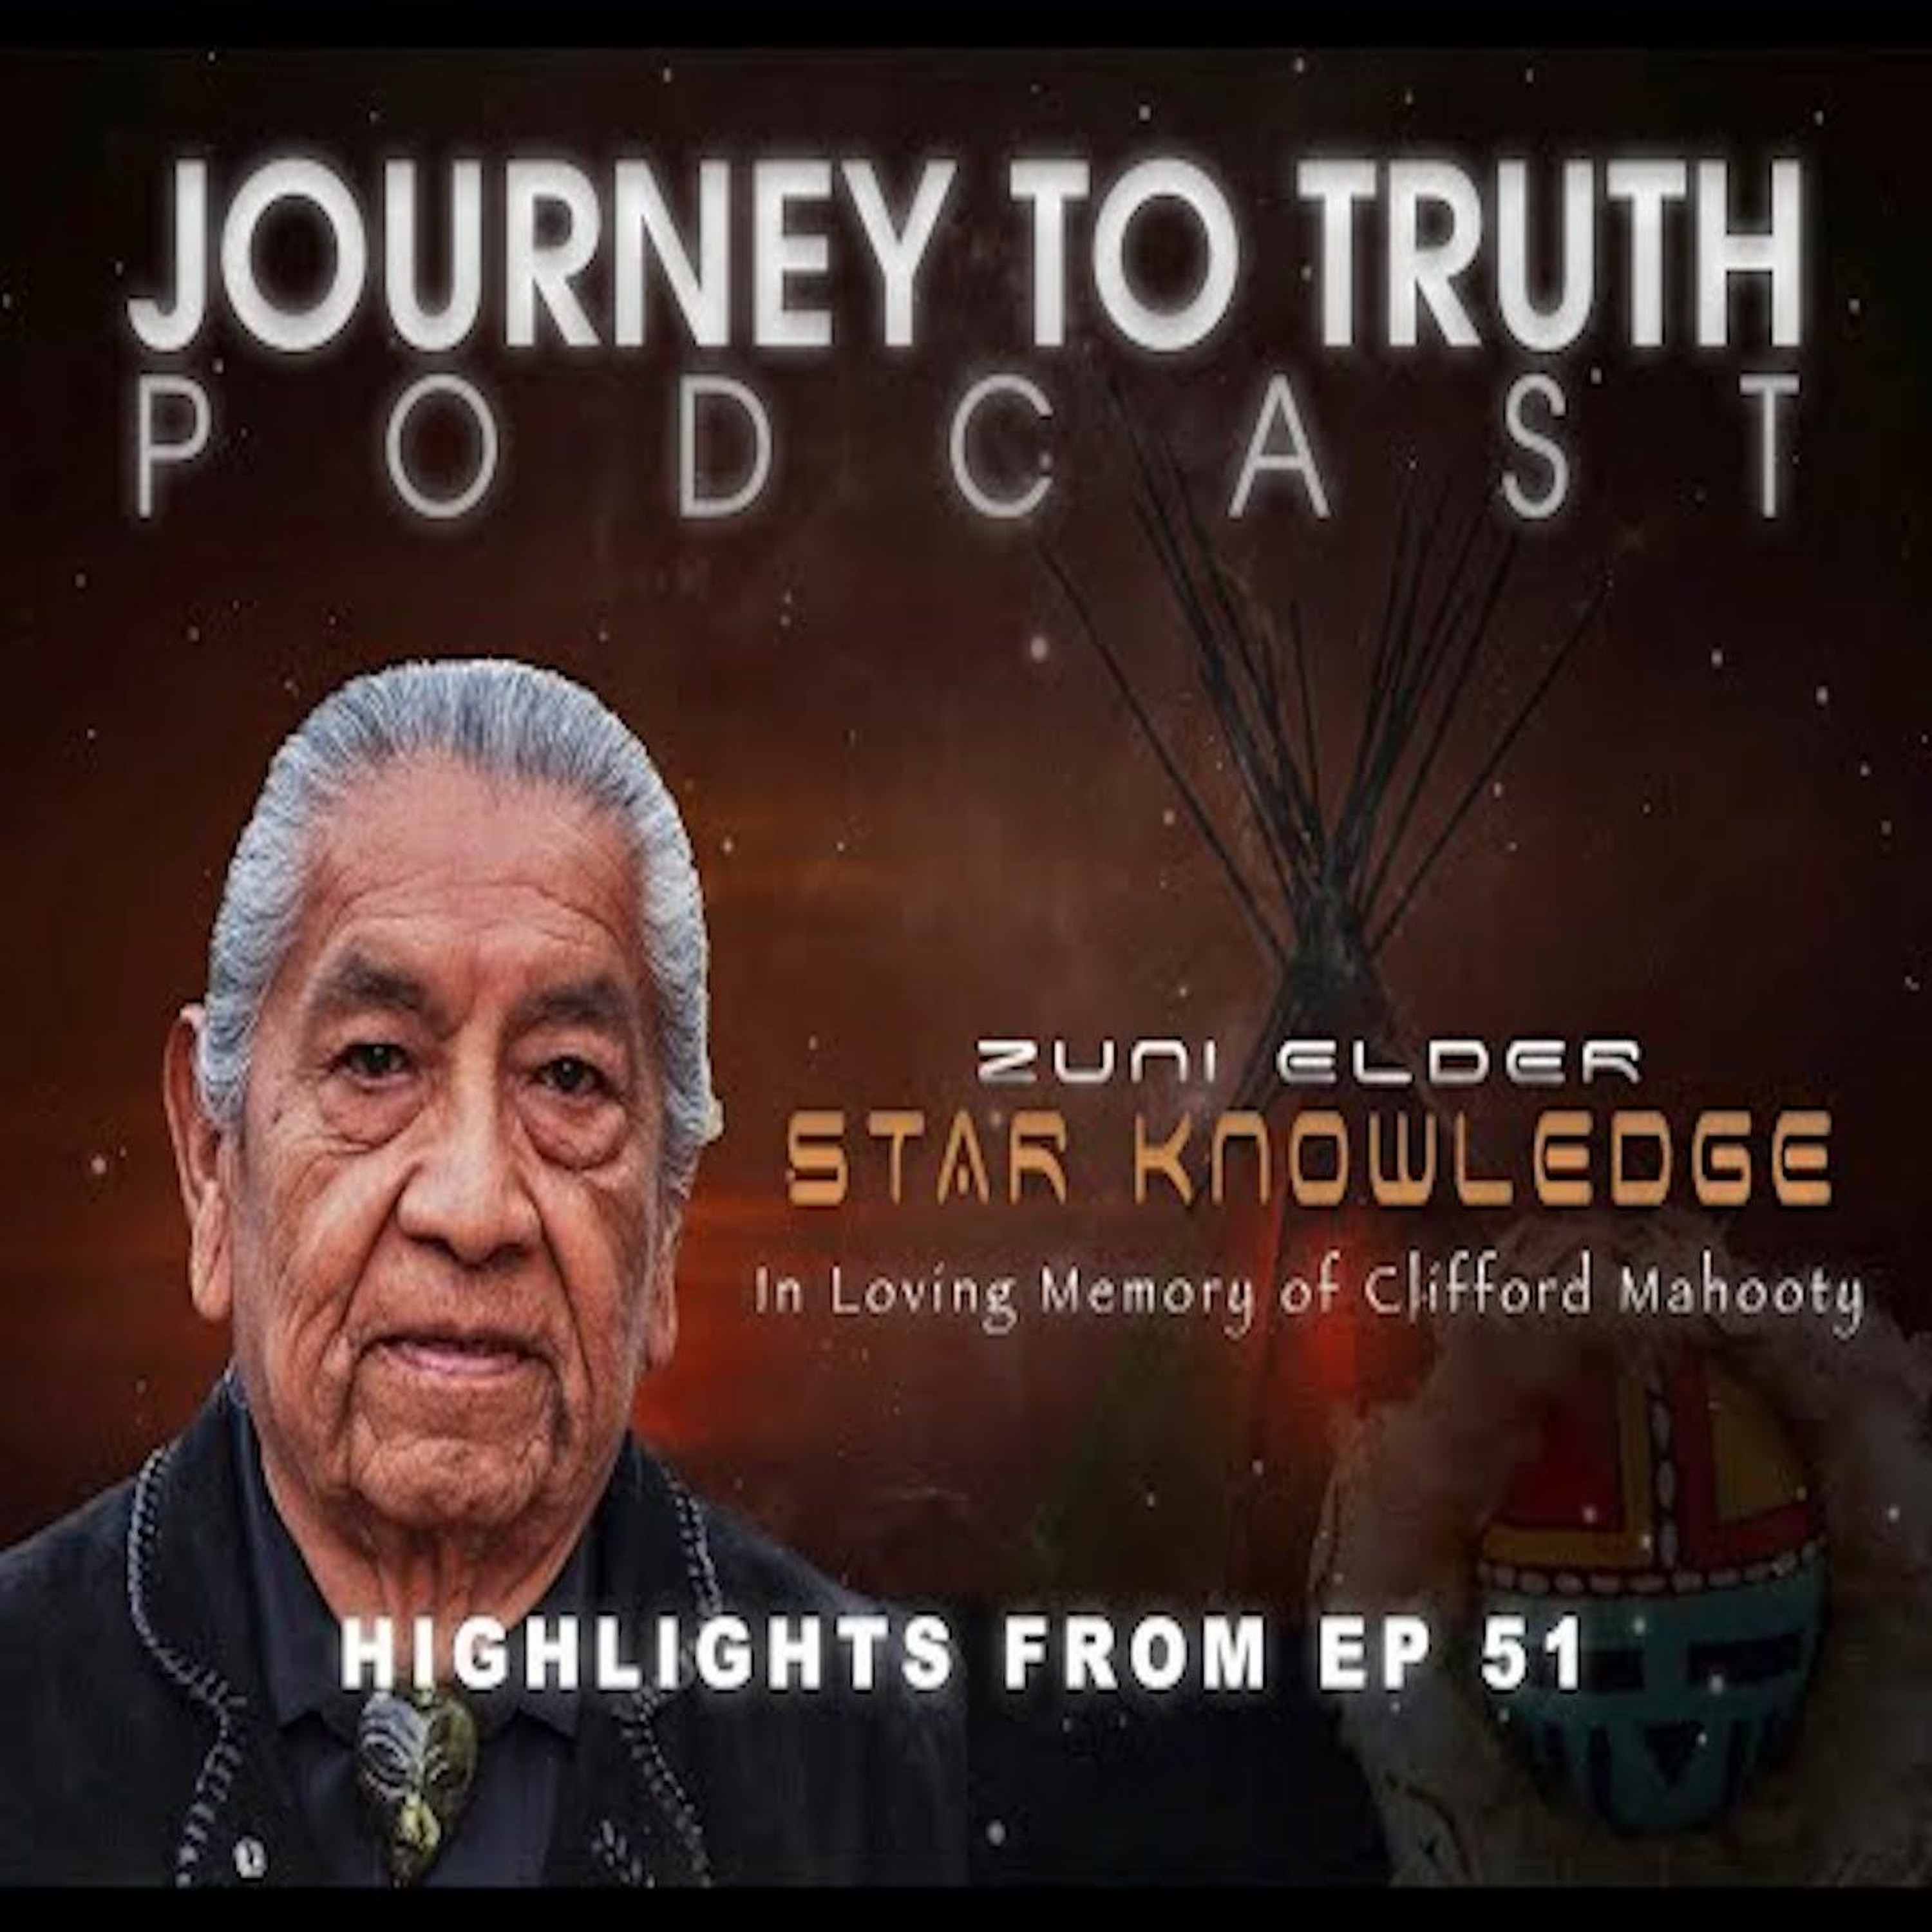 In Loving Memory Of Clifford Mahooty - Zuni Elder Star Knowledge - Highlights From EP 51